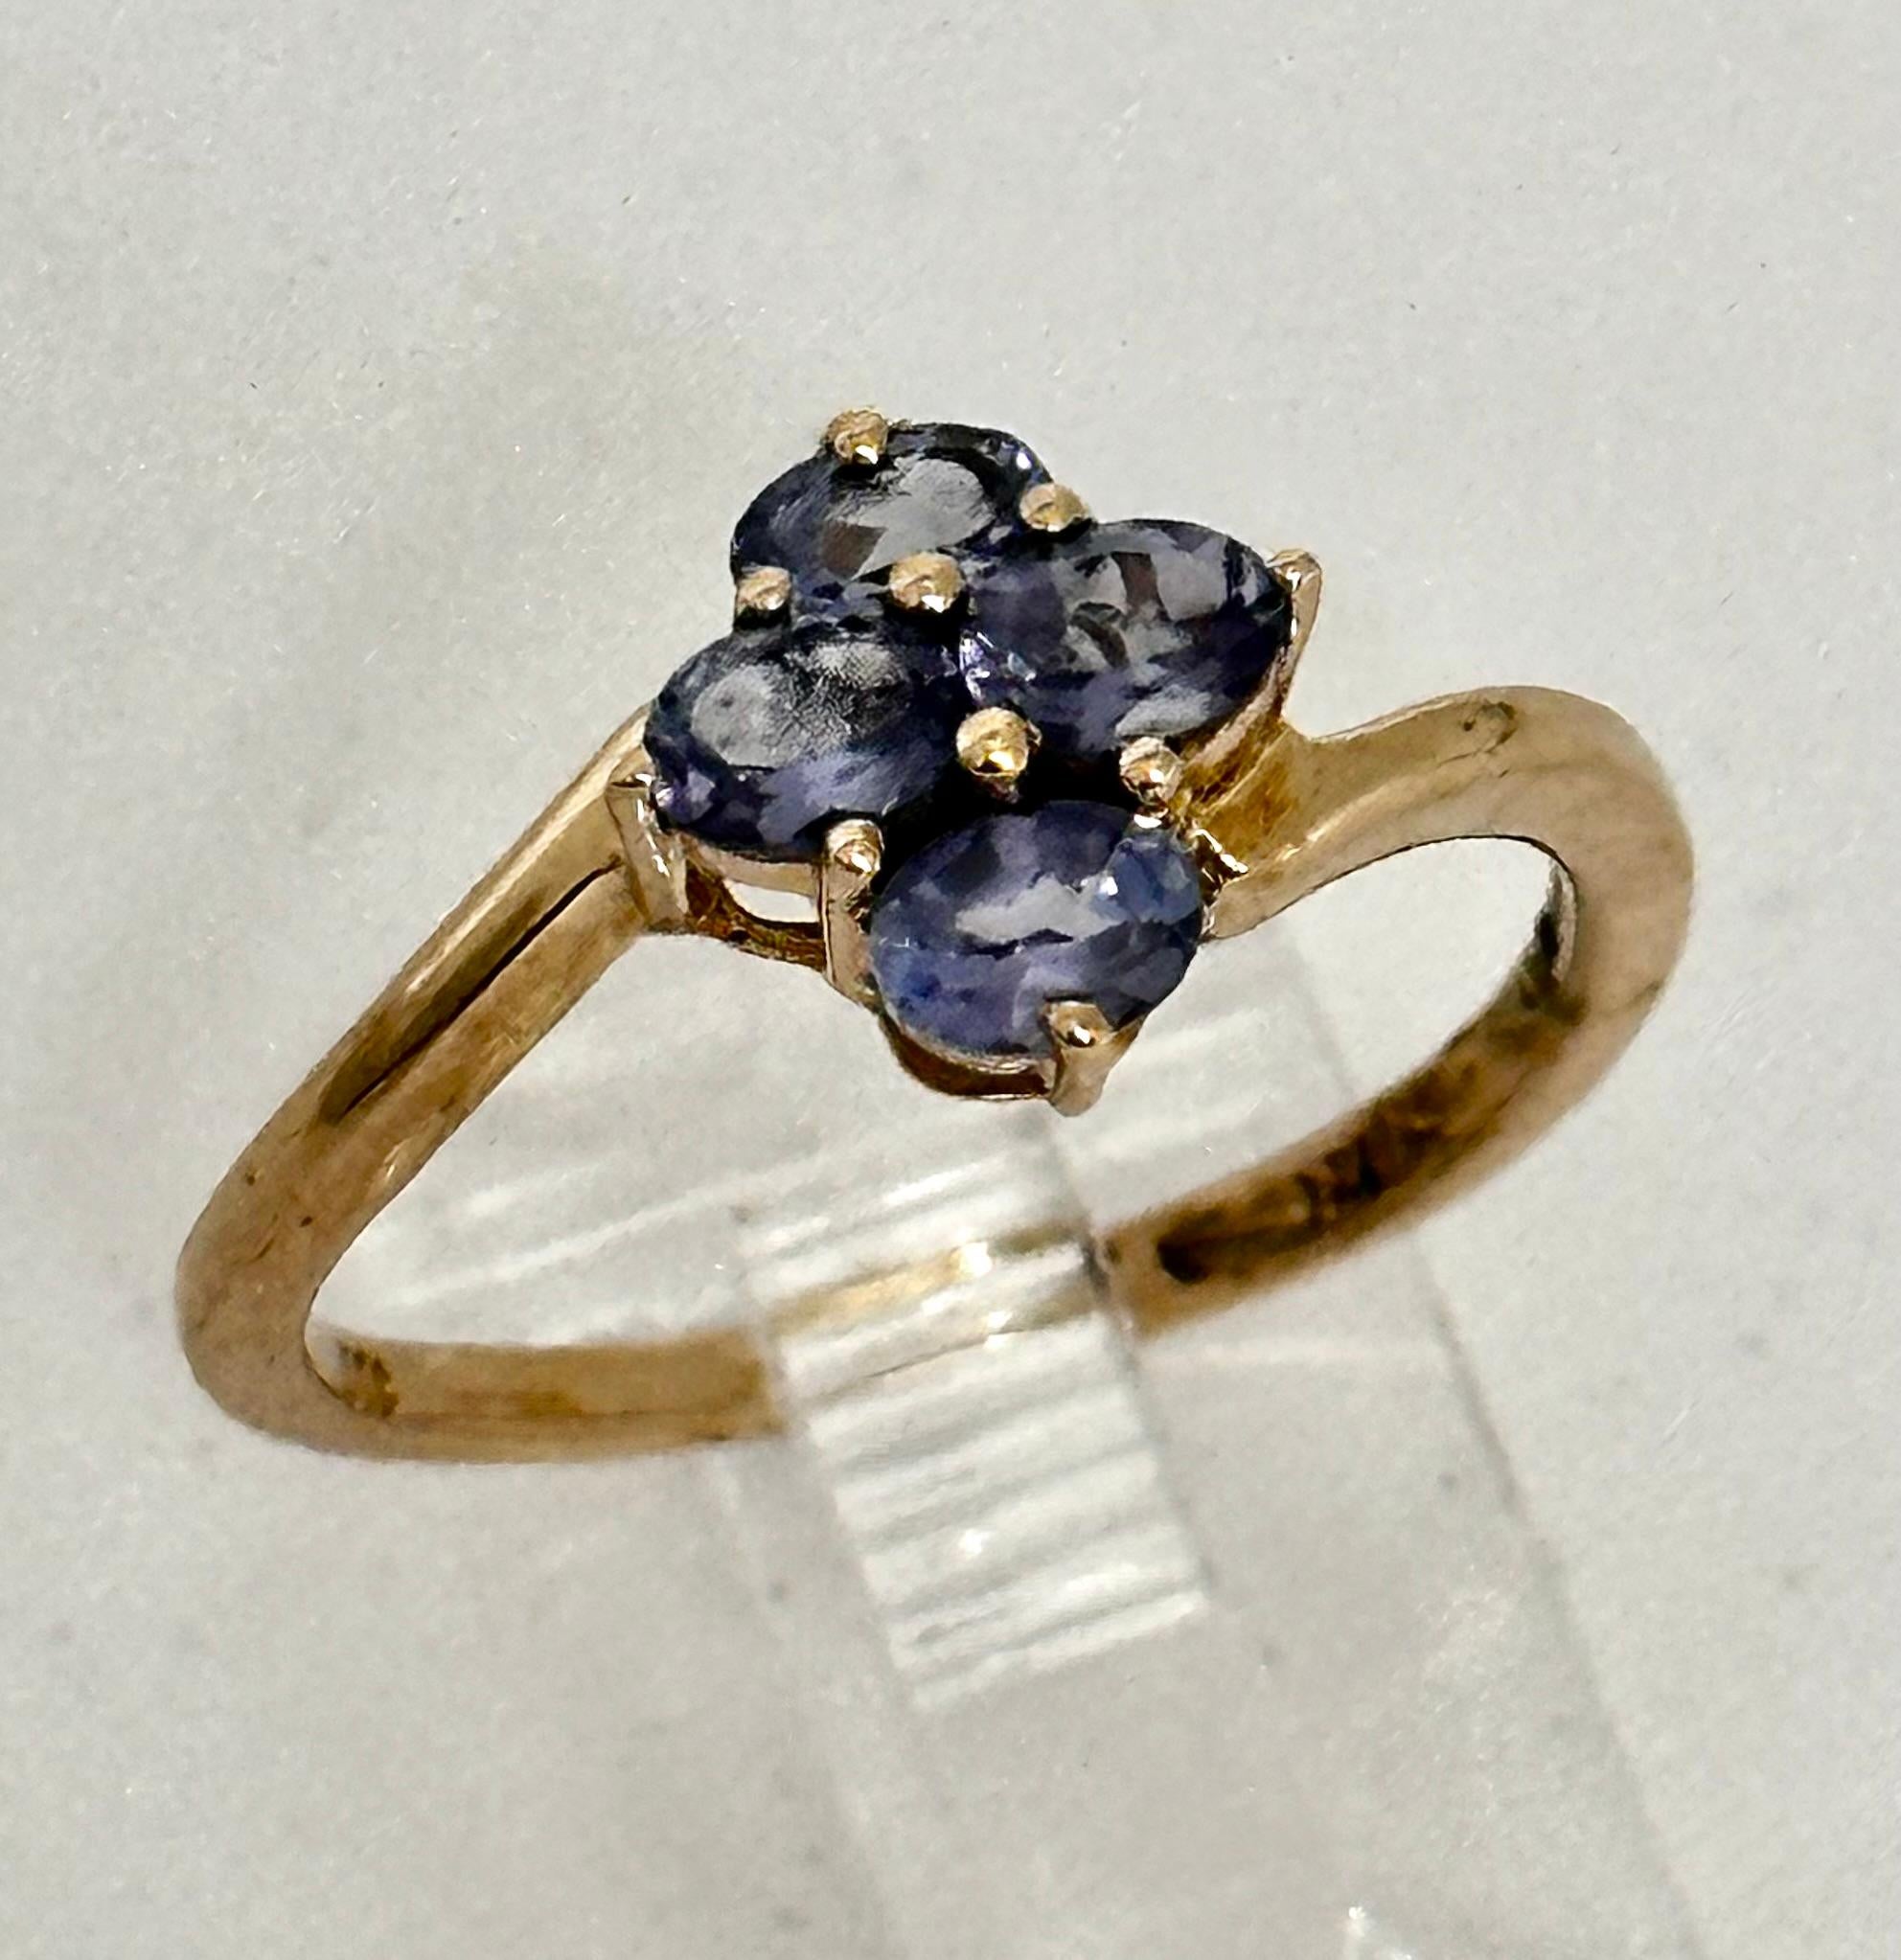 14k Yellow Gold ~ 4 Oval Tanzanite ~ Ring ~ Size 7

Tanzanite is commonly believed to facilitate a higher consciousness and stimulate intuition and perception. Some believe that it aids in detoxifying the body and improving vitality. It is said to